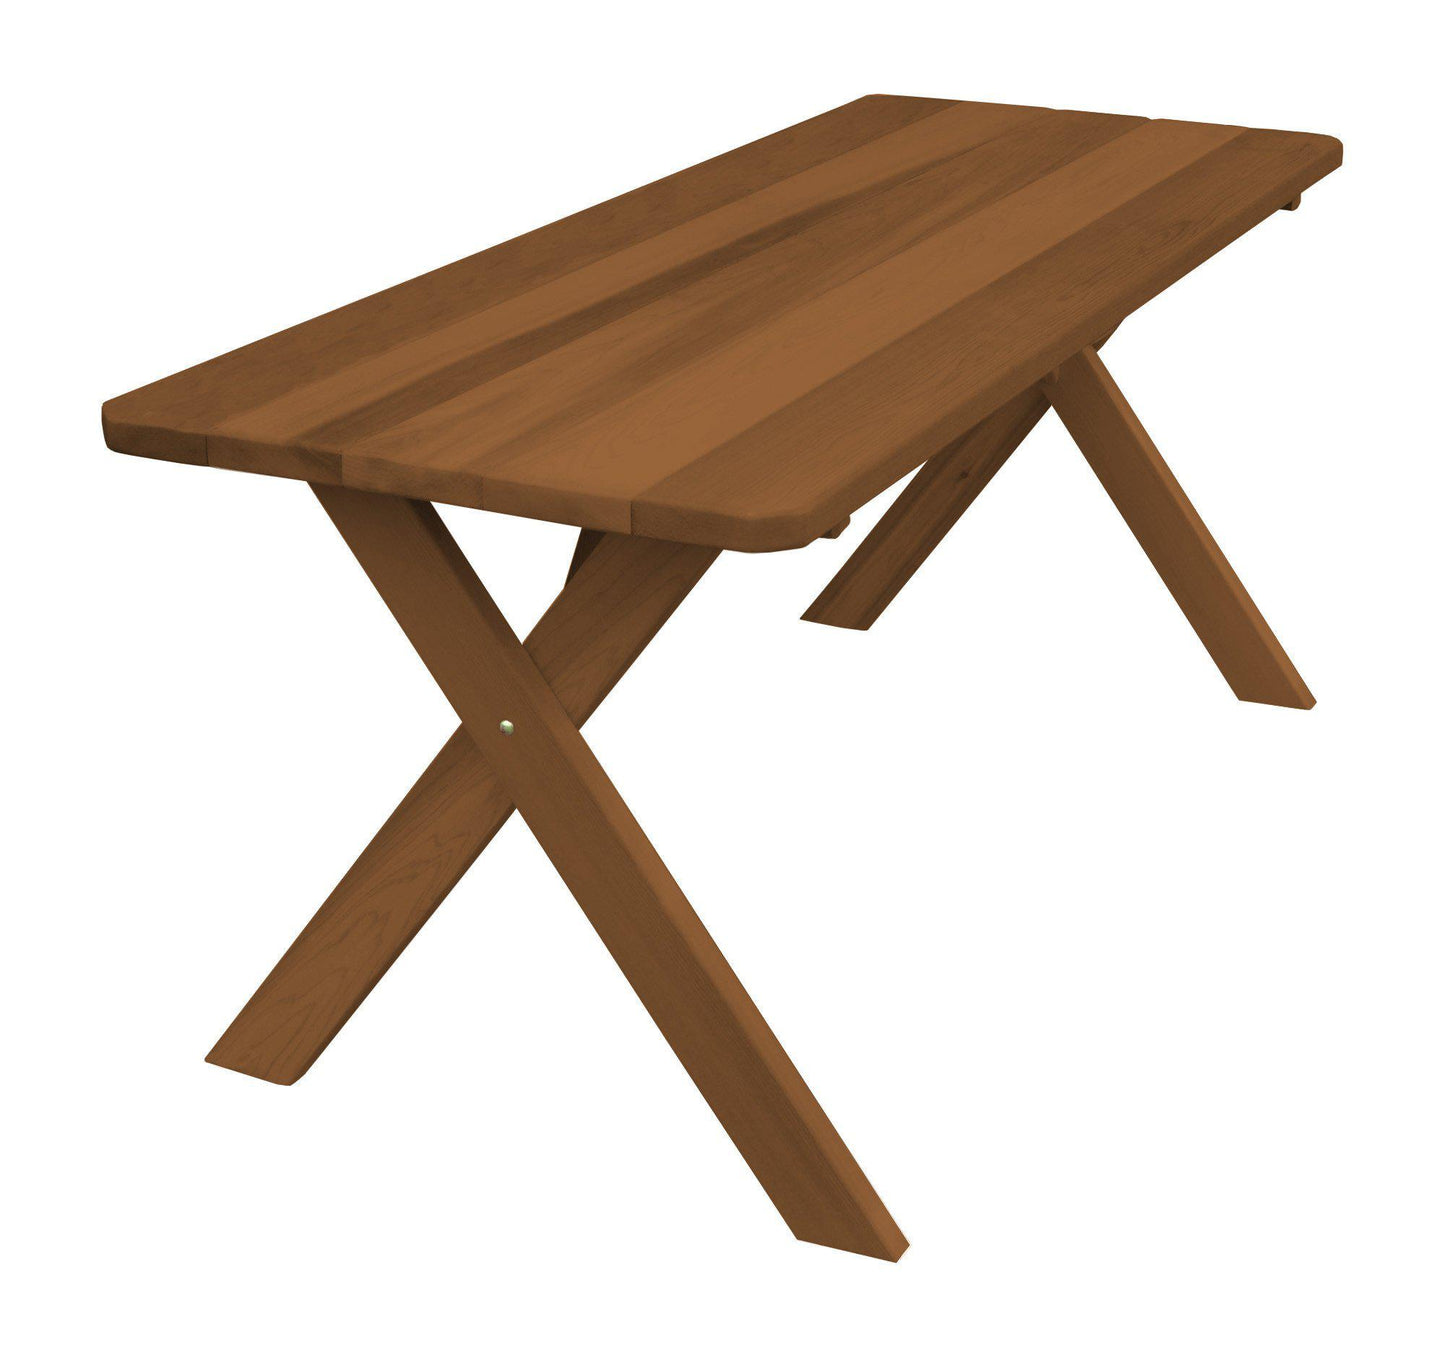 A&L FURNITURE CO.Western Red Cedar 94" Cross-leg Table Only - Specify for FREE 2" Umbrella Hole - LEAD TIME TO SHIP 2 WEEKS